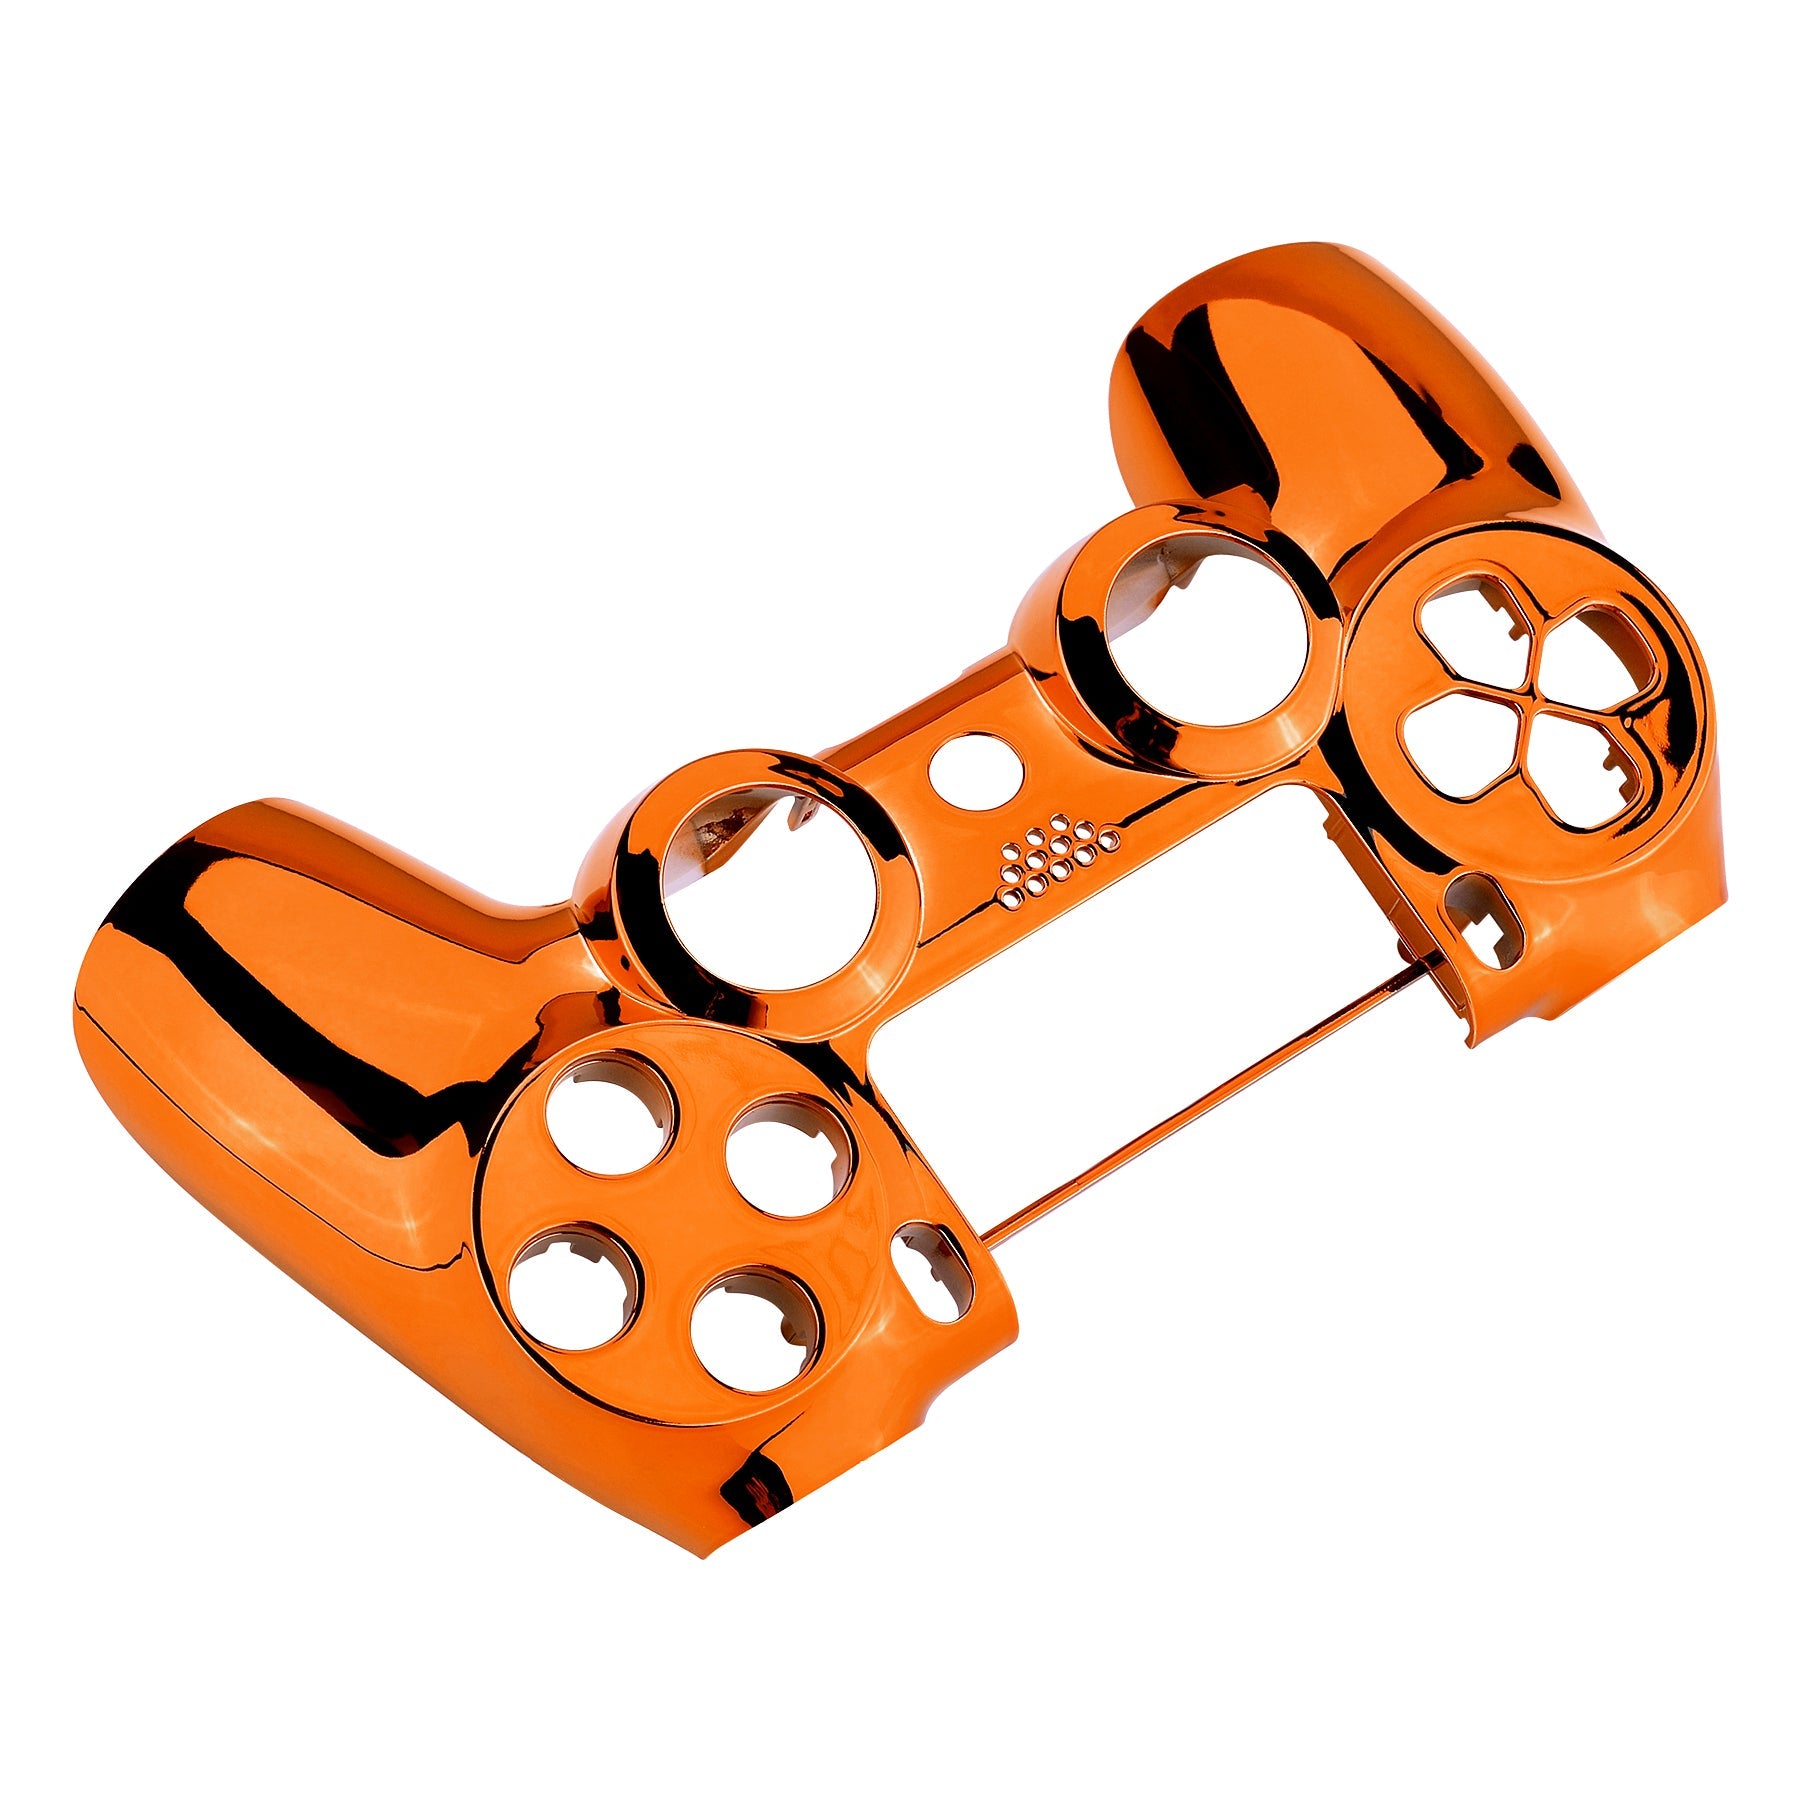 eXtremeRate Replacement Front Housing Shell for PS4 Slim Pro Controller  Controller (CUH-ZCT2 JDM-040/050/055) - Chrome Orange